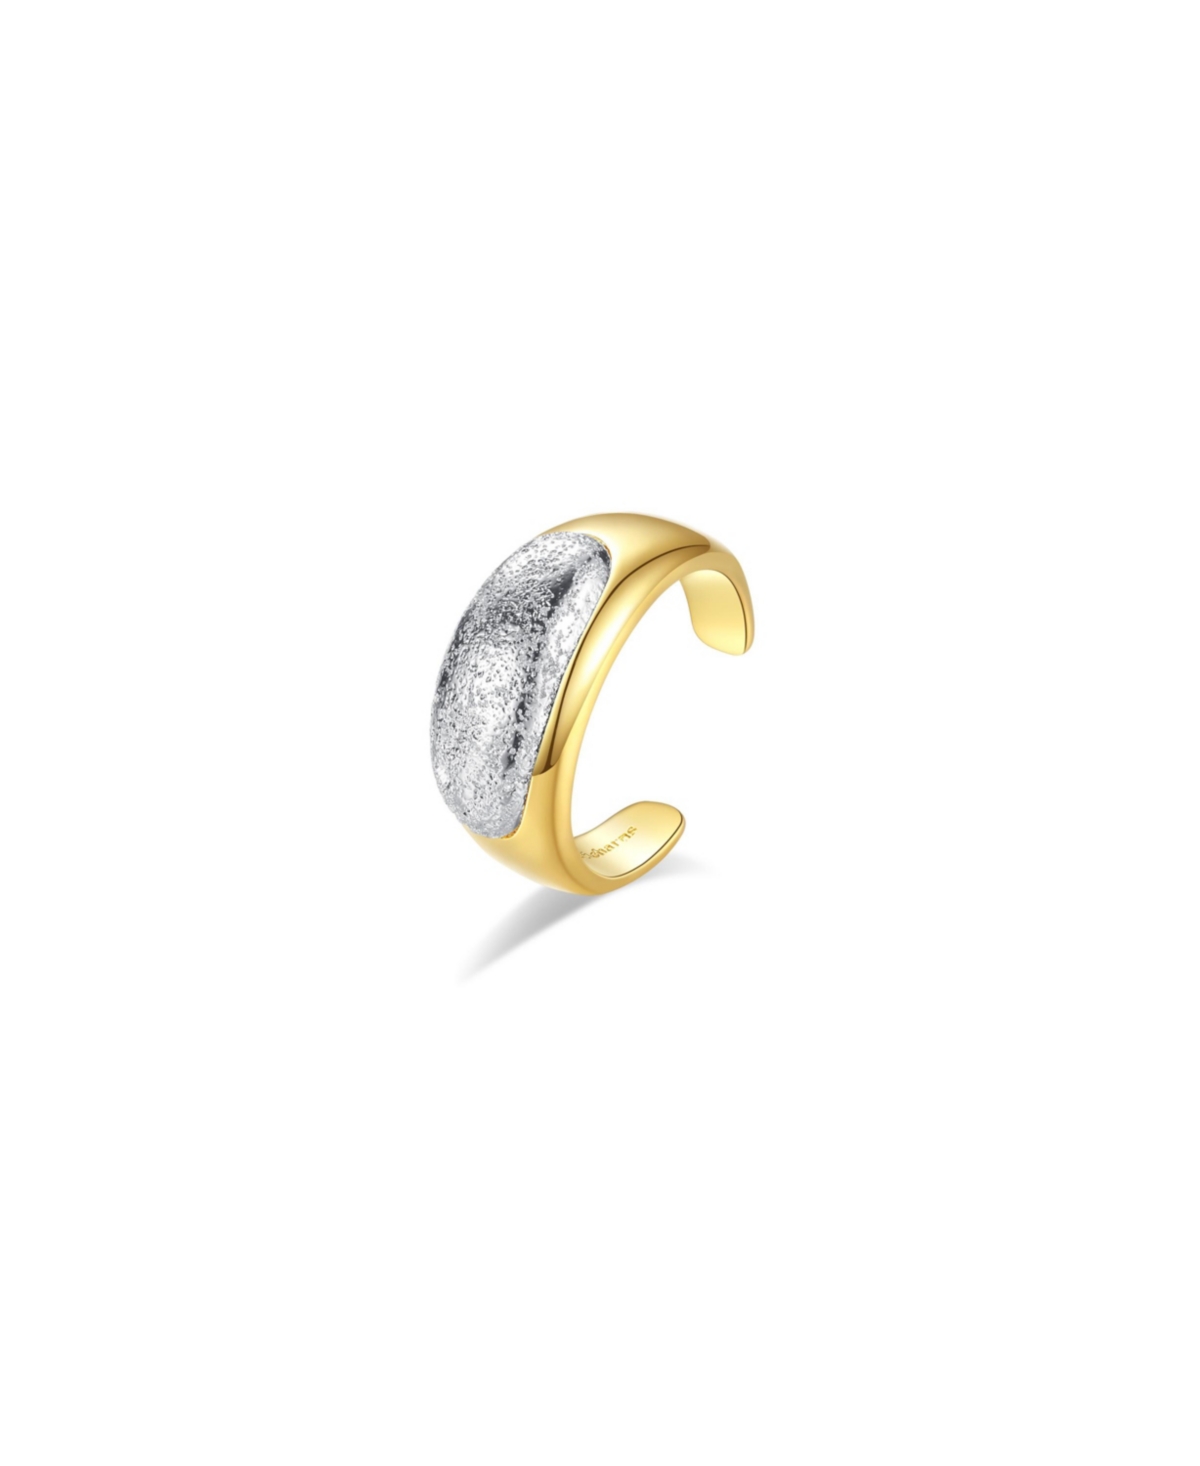 Frosted and Matted Texture Two Tone Ring - Gold